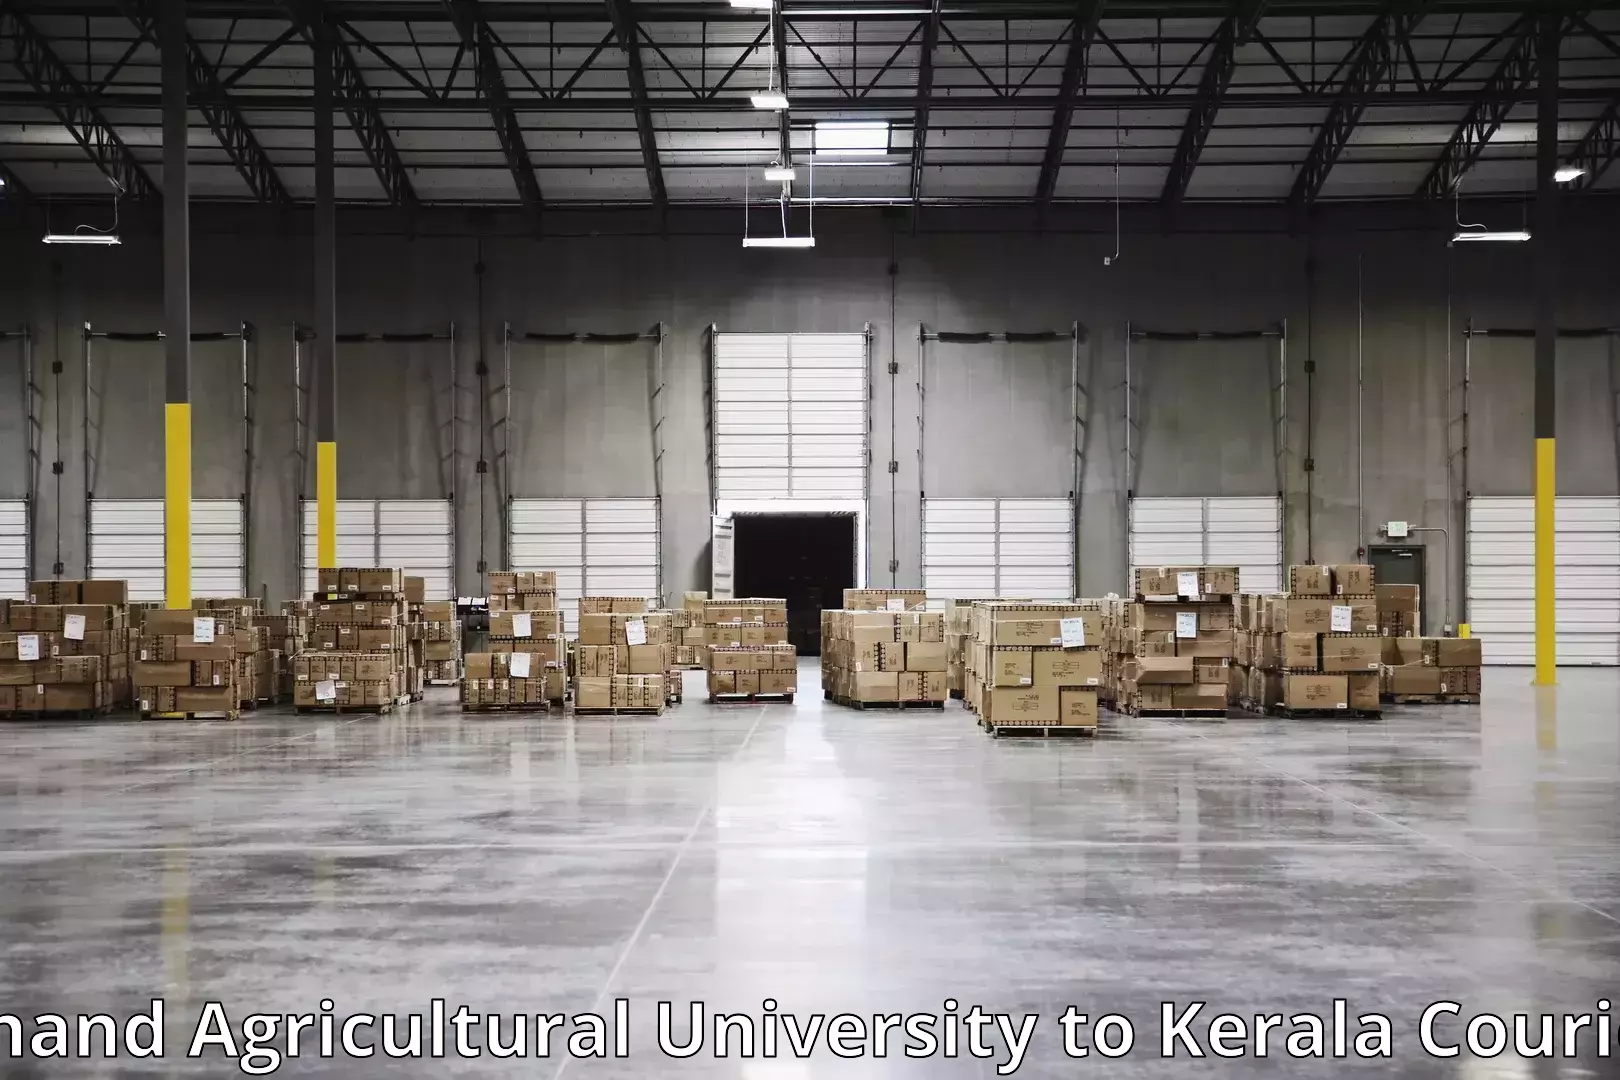 Efficient moving company Anand Agricultural University to Kannapuram